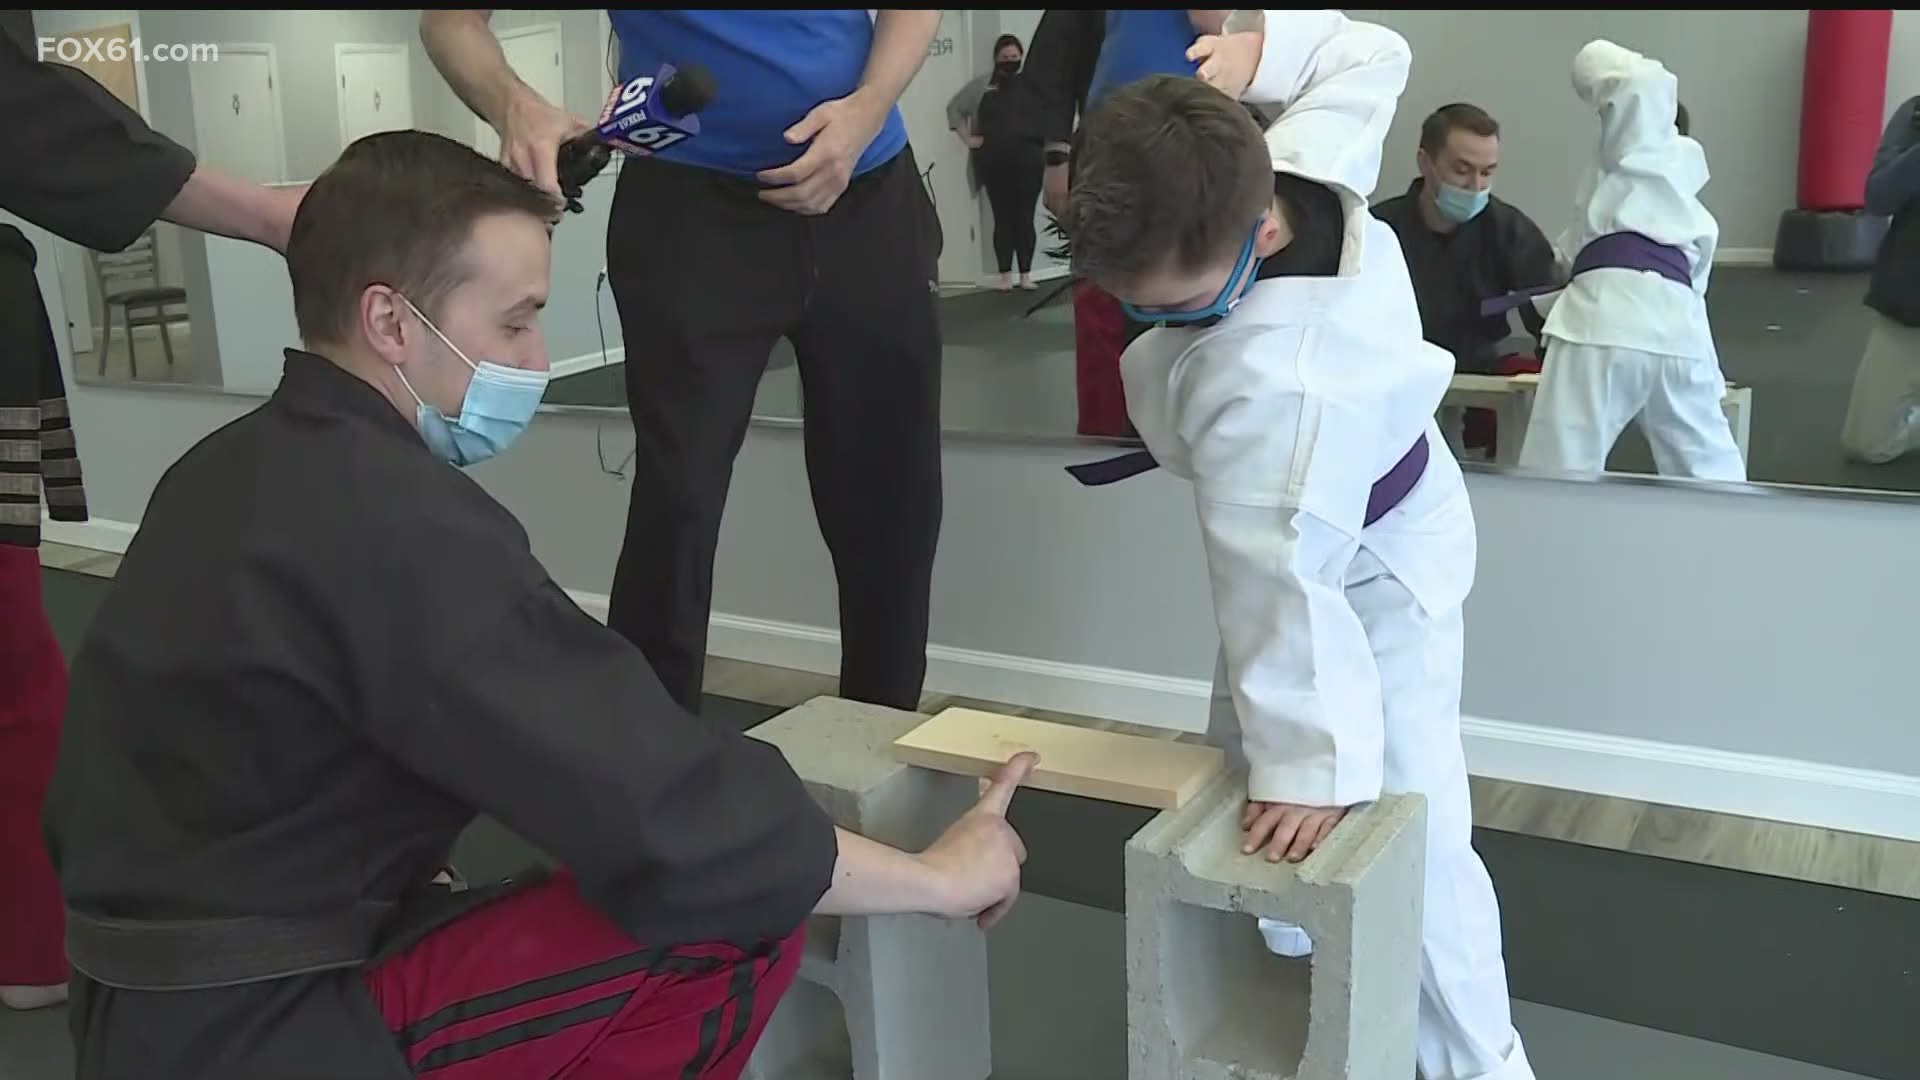 At Impact Martial Arts, 7-year-old Jess Bond is learning karate in a brand new dojo from instructors he loves.